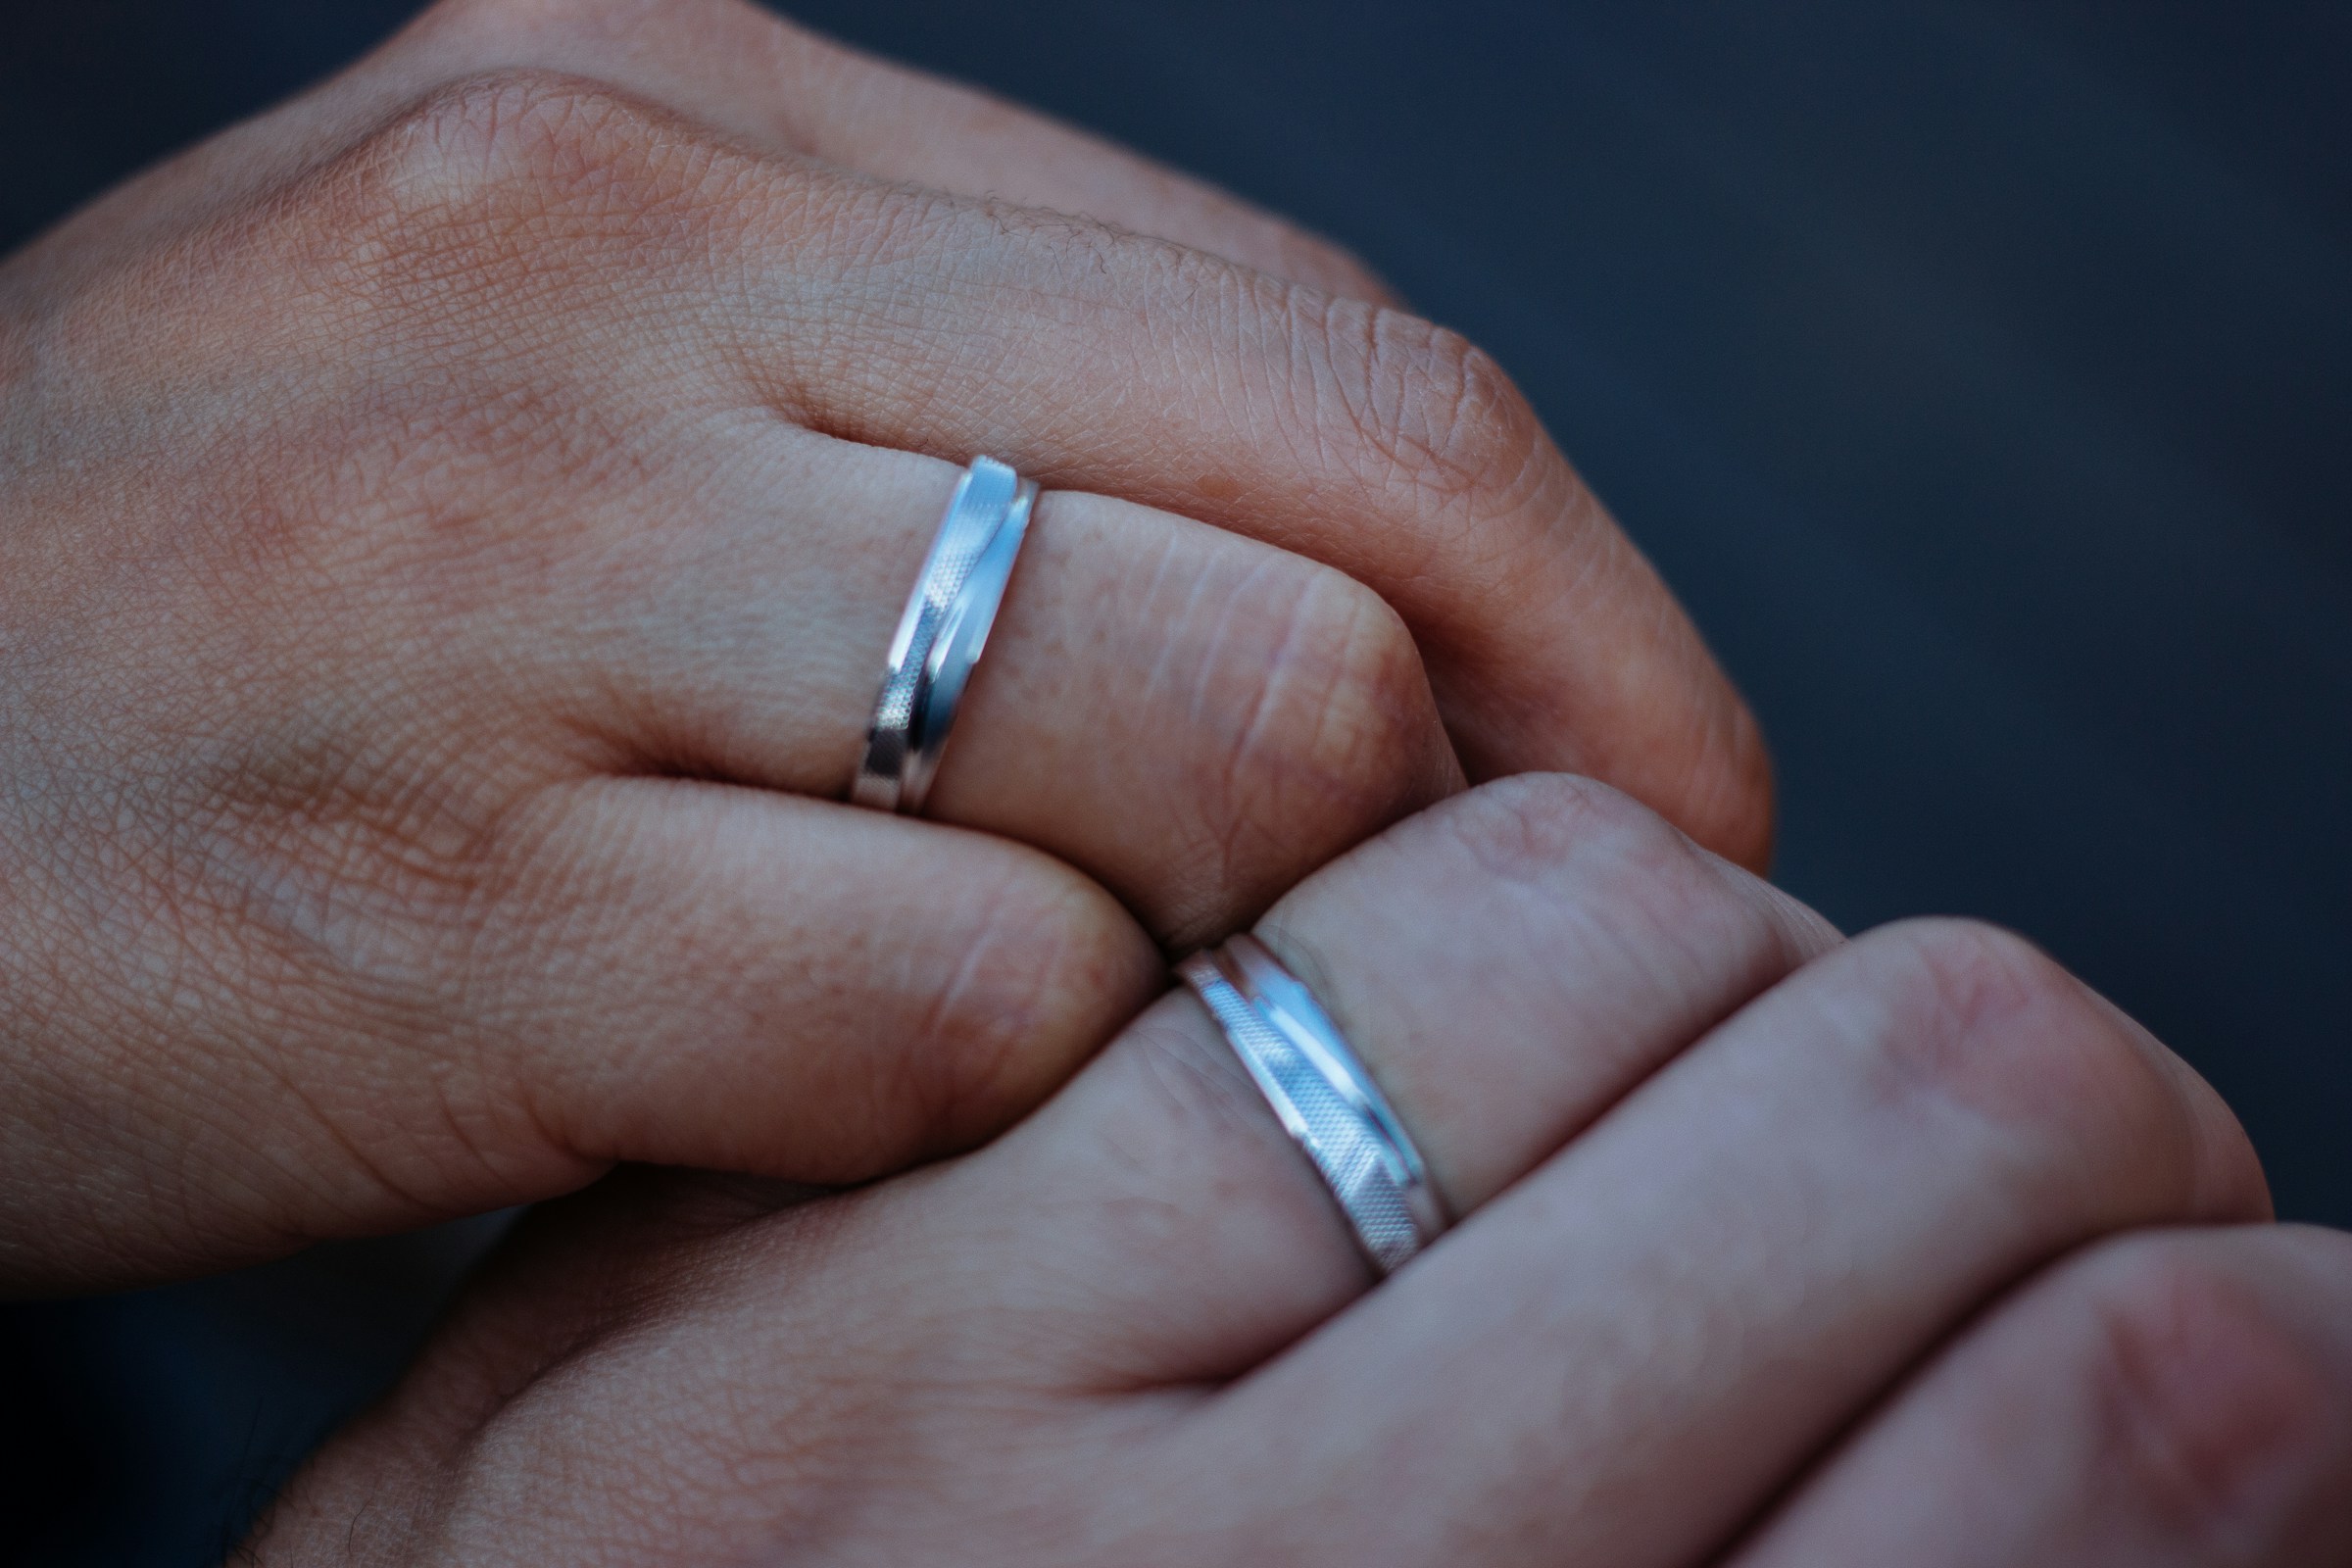 A couple showing off their wedding rings | Source: Unsplash